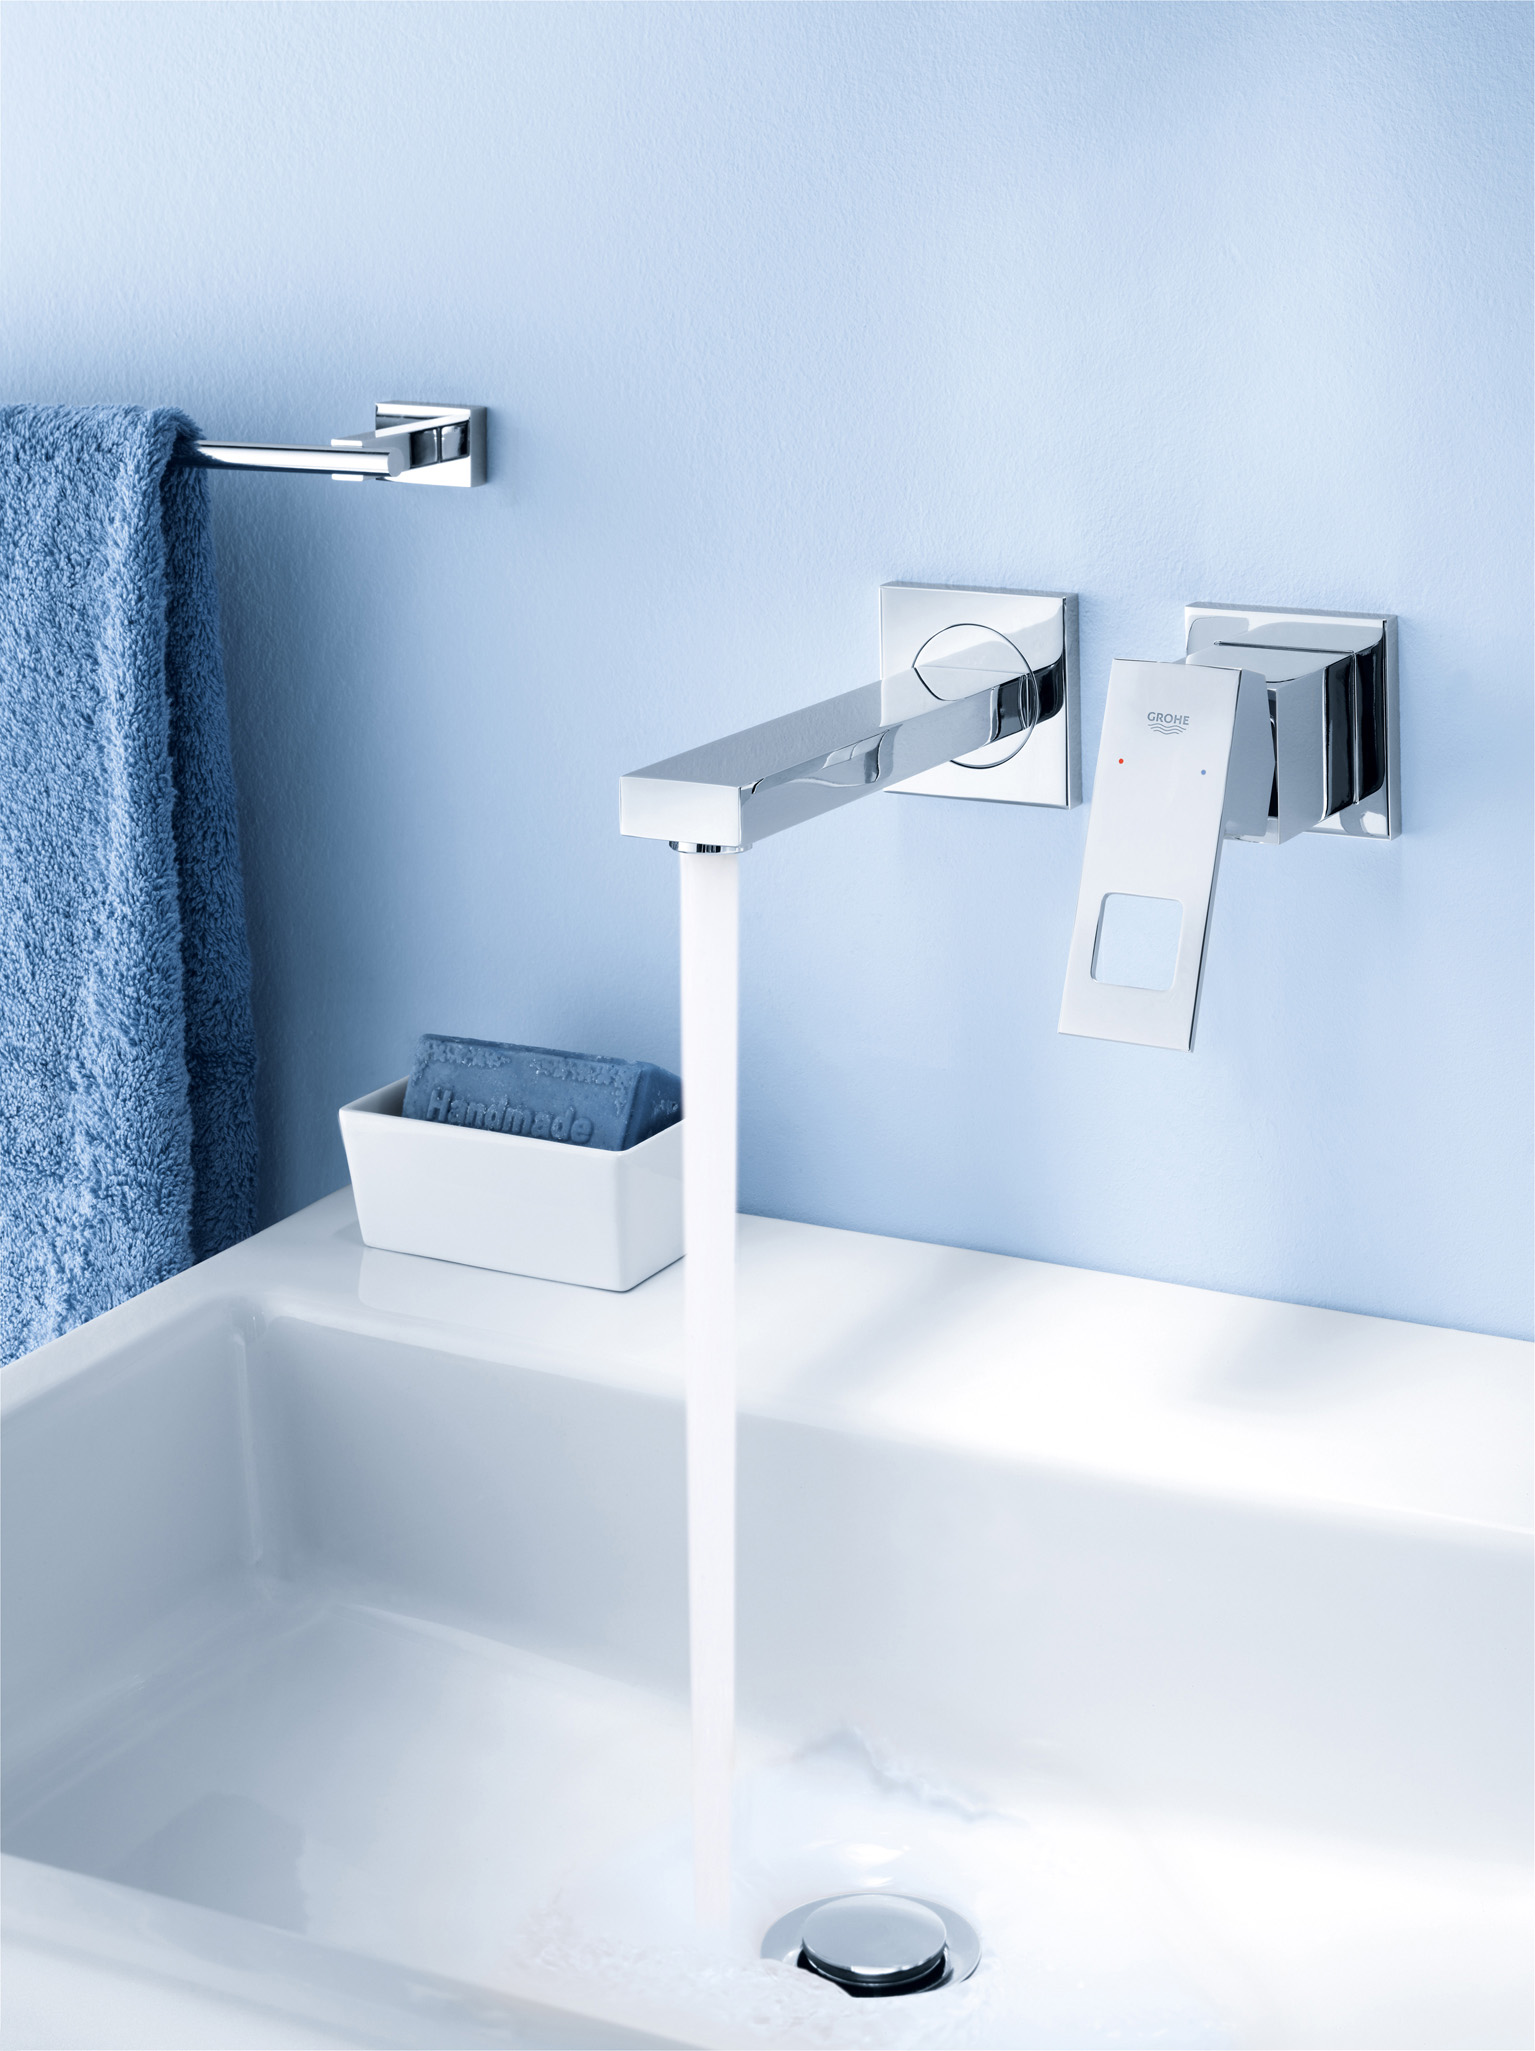 Grohe Bathroom Faucets New Car Price 2020